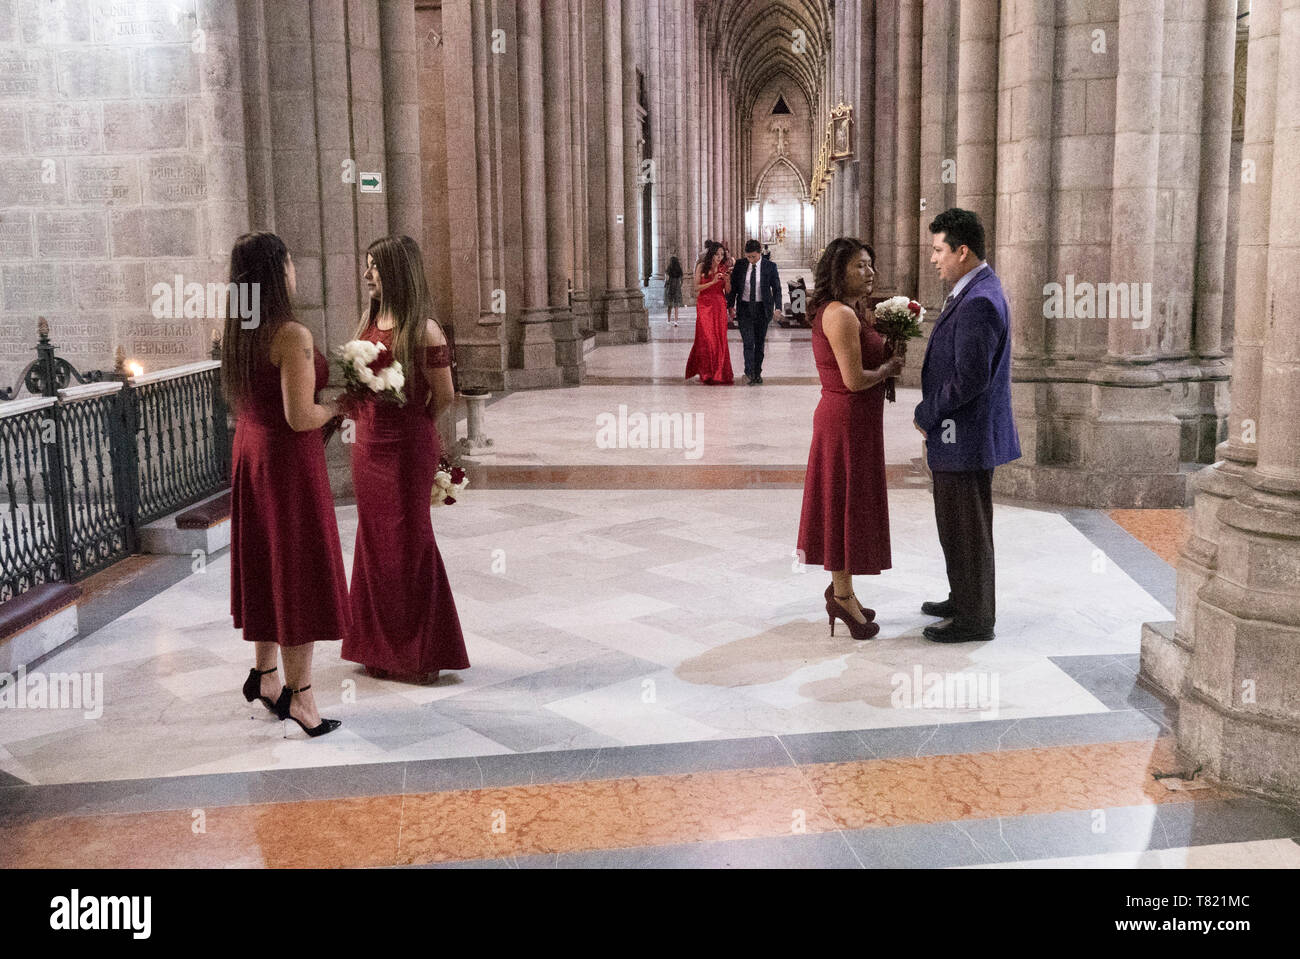 A wedding in the Old City Cathedral in Quito Equador Stock Photo